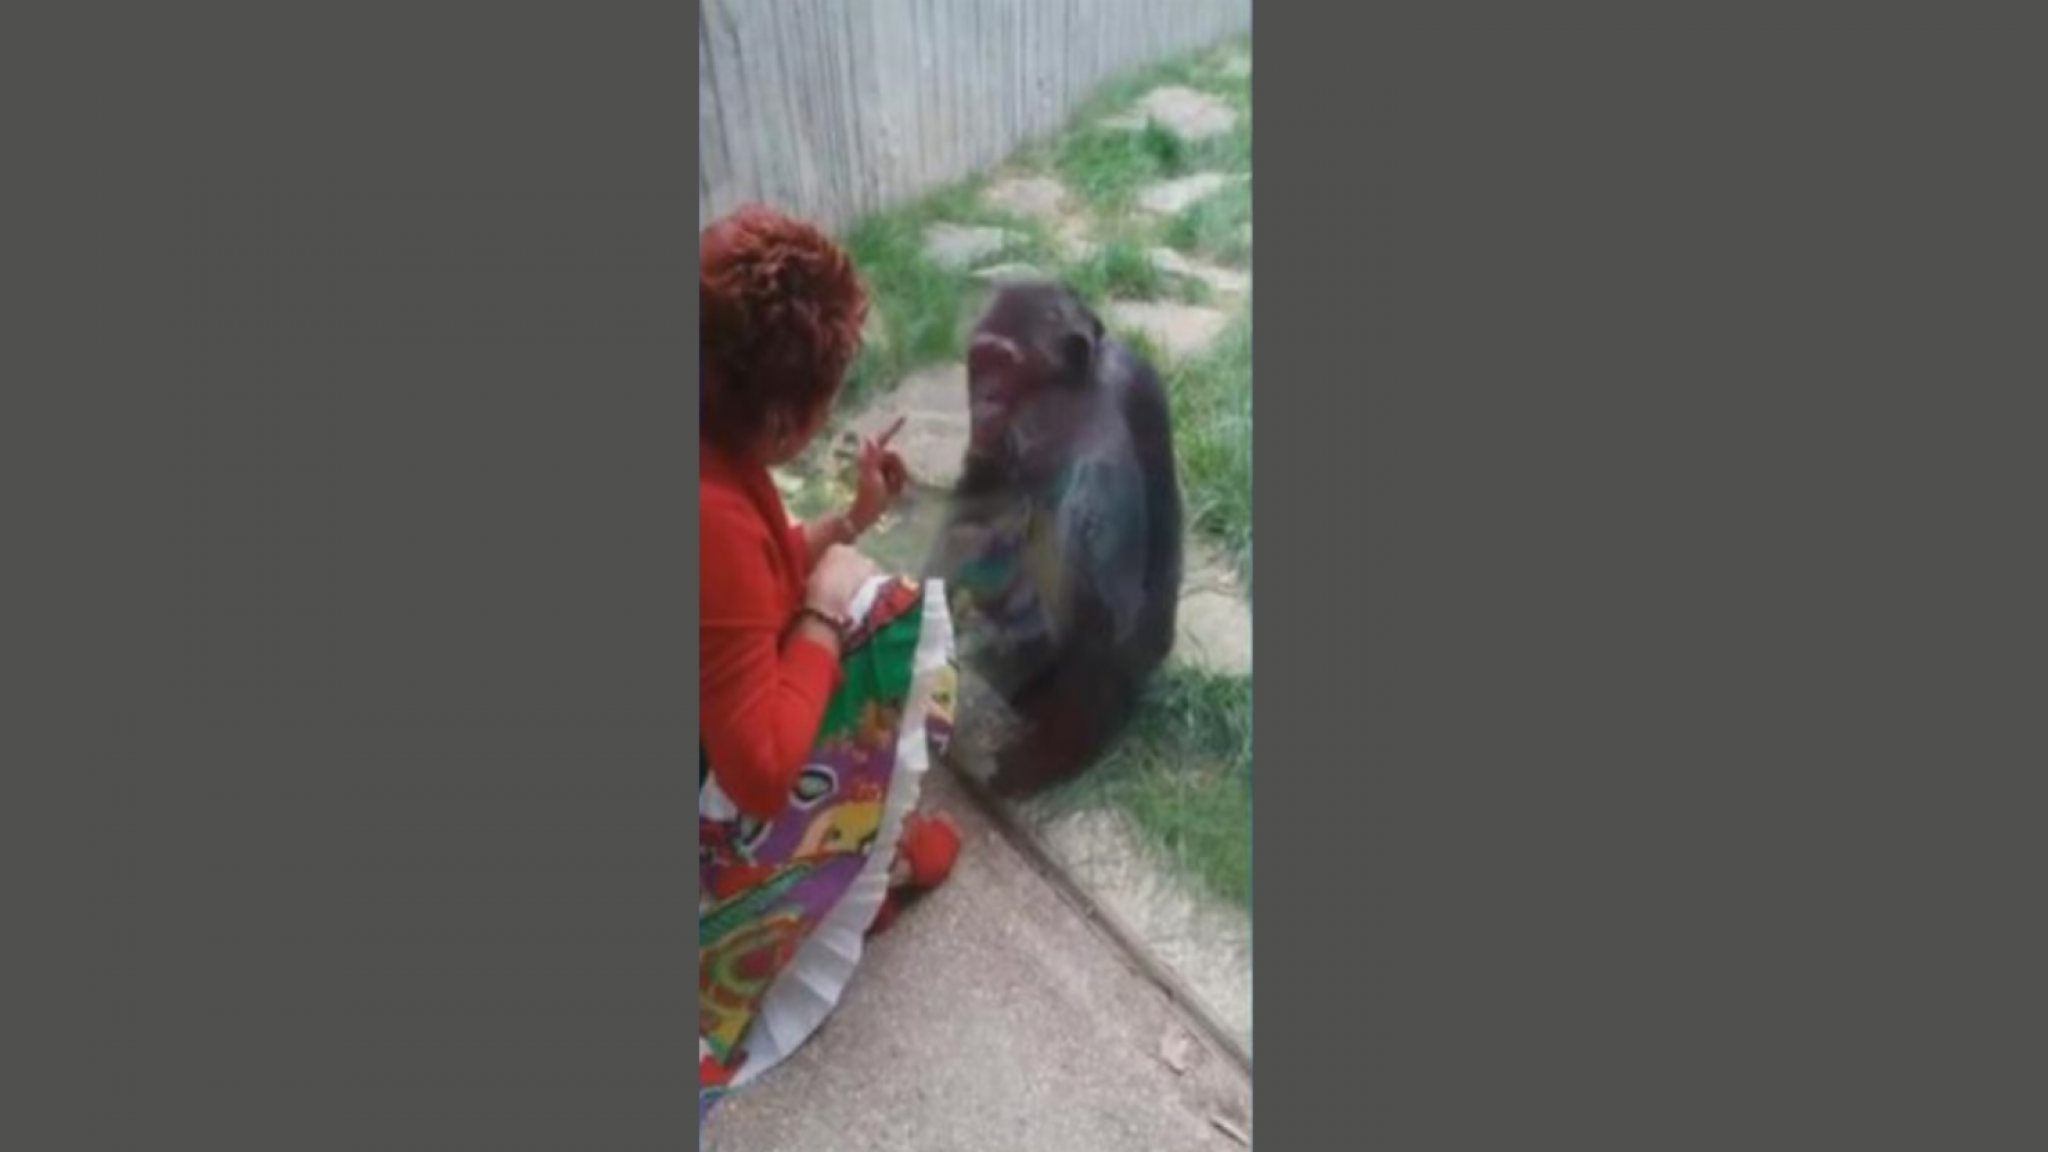 Woman banned from contact with chimpanzees: 'A fight arises within a group of monkeys'